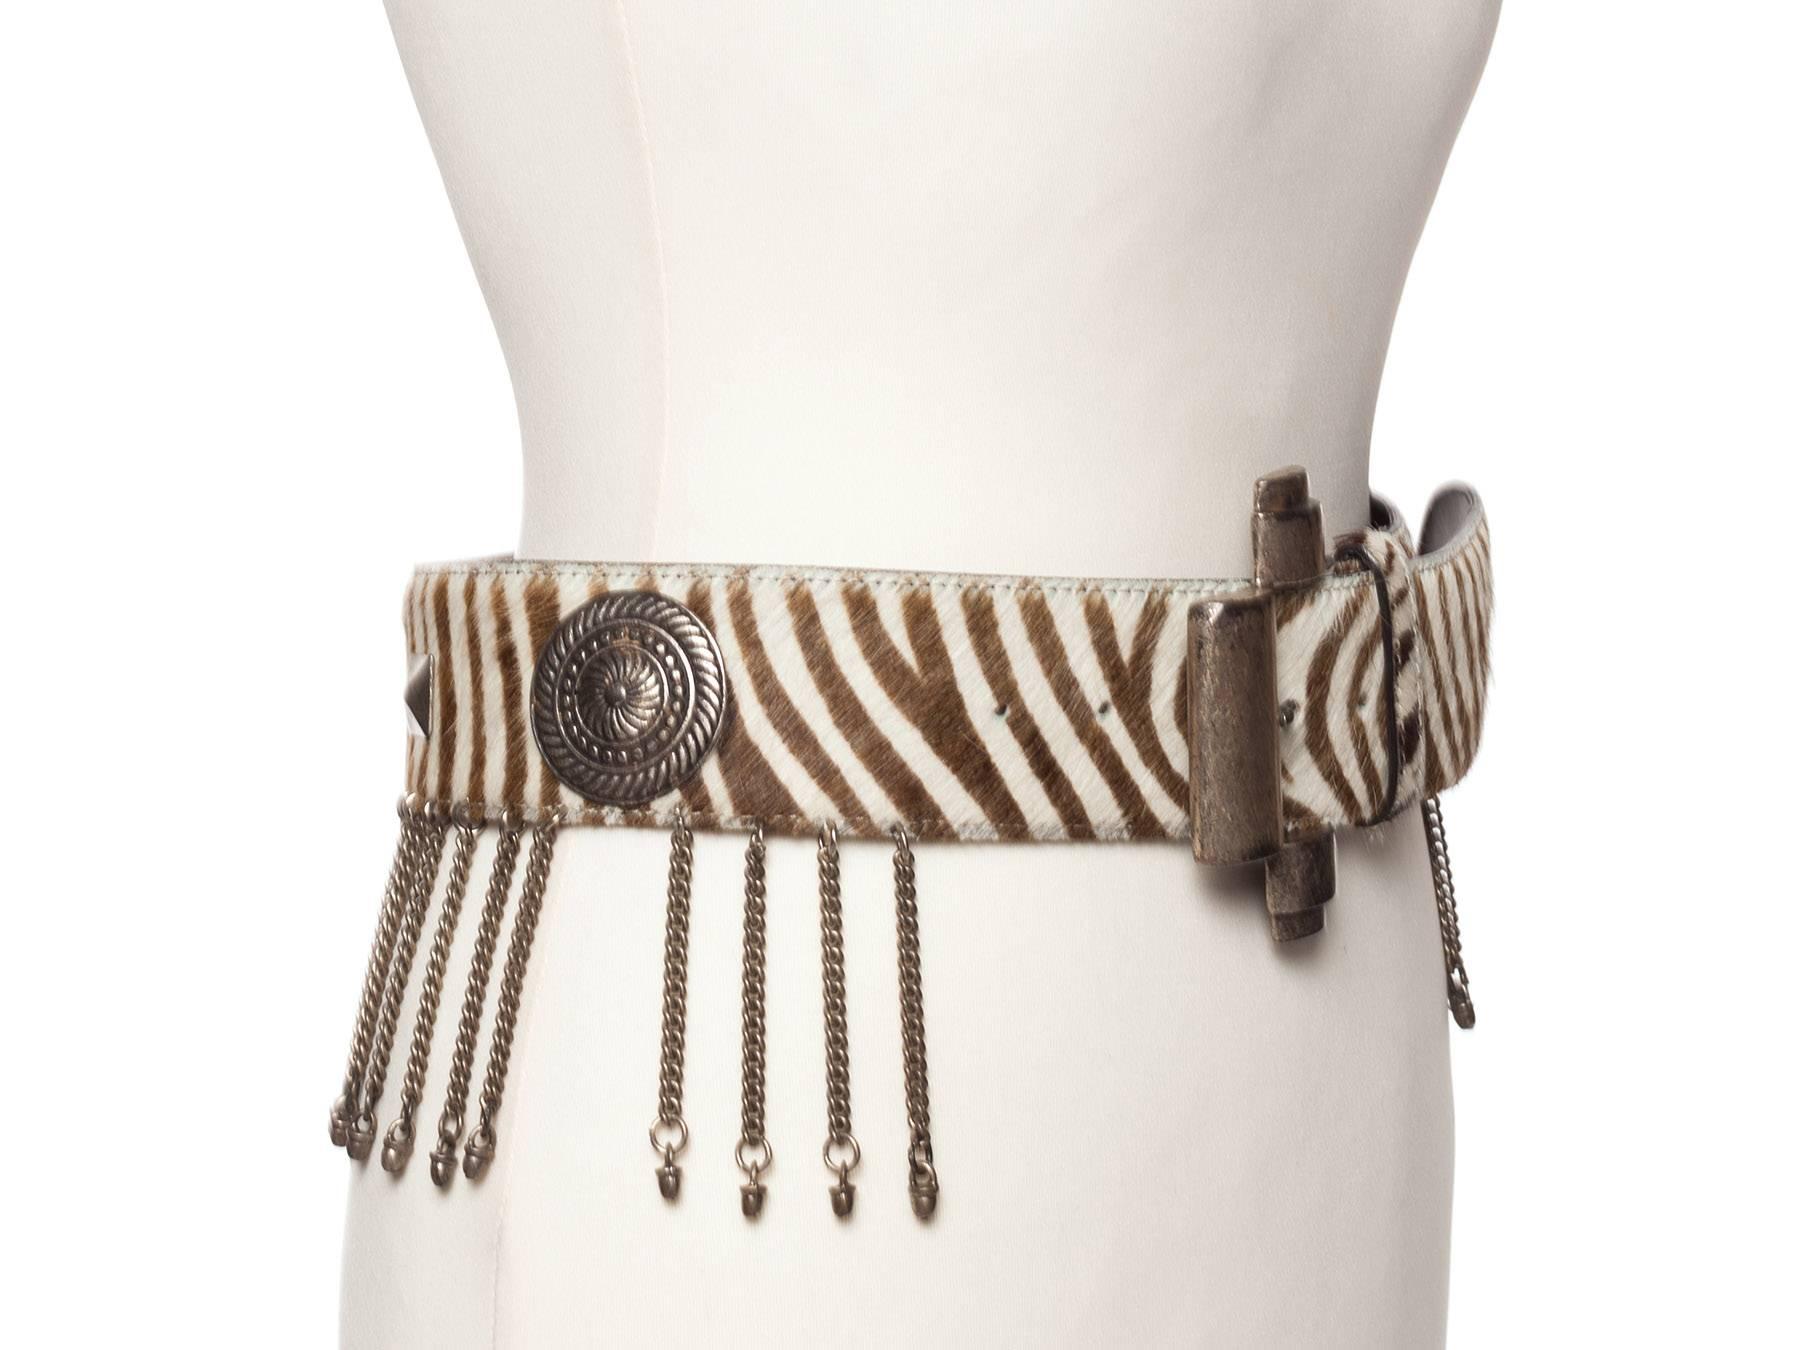 Belt has large grommets and metal fringe trim make this cool belt cooler and is a reminder of all things ethnic and glorious from Rifat Ozbeks hey day in fashion history.